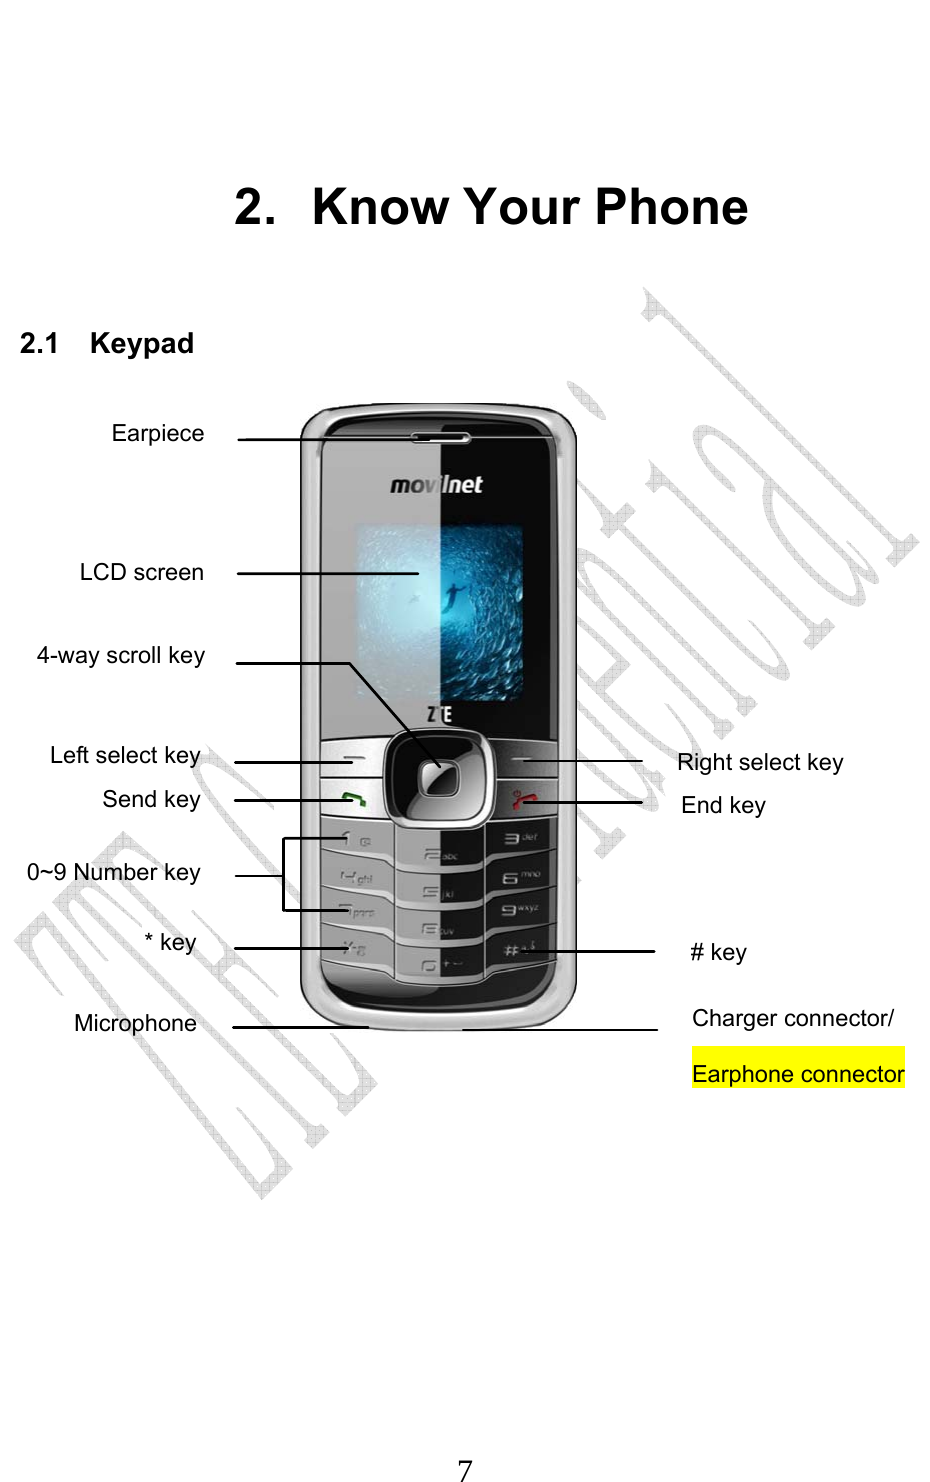                              7 2. Know Your Phone 2.1  Keypad                    Send key End key Charger connector/ Earphone connector EarpieceLCD screen4-way scroll keyLeft select key 0~9 Number key Microphone Right select key  * key  # key 